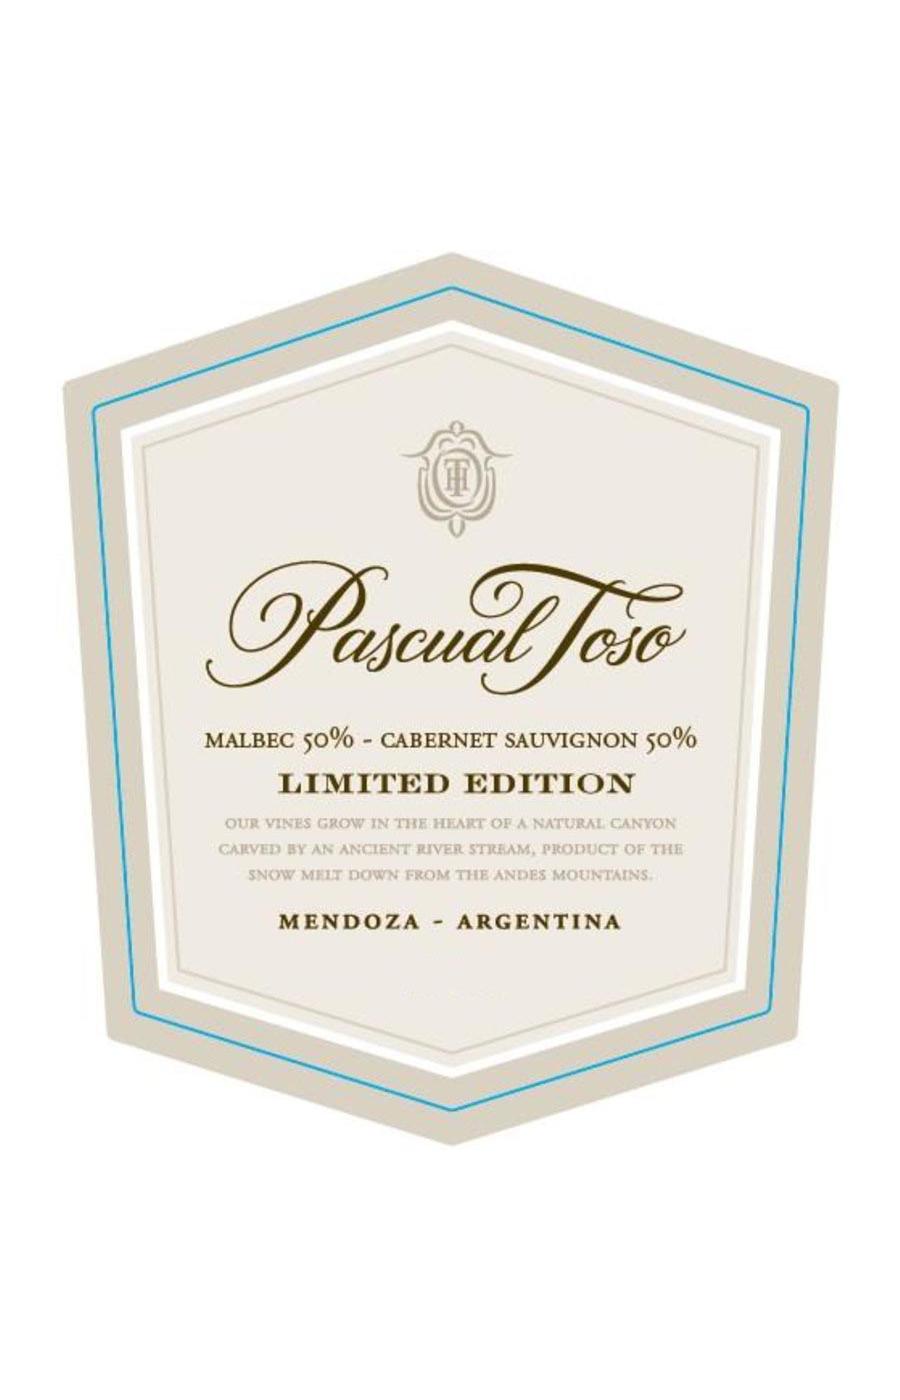 Pascual Toso Red Blend Malbec Cabernet Sauvignon; image 2 of 2